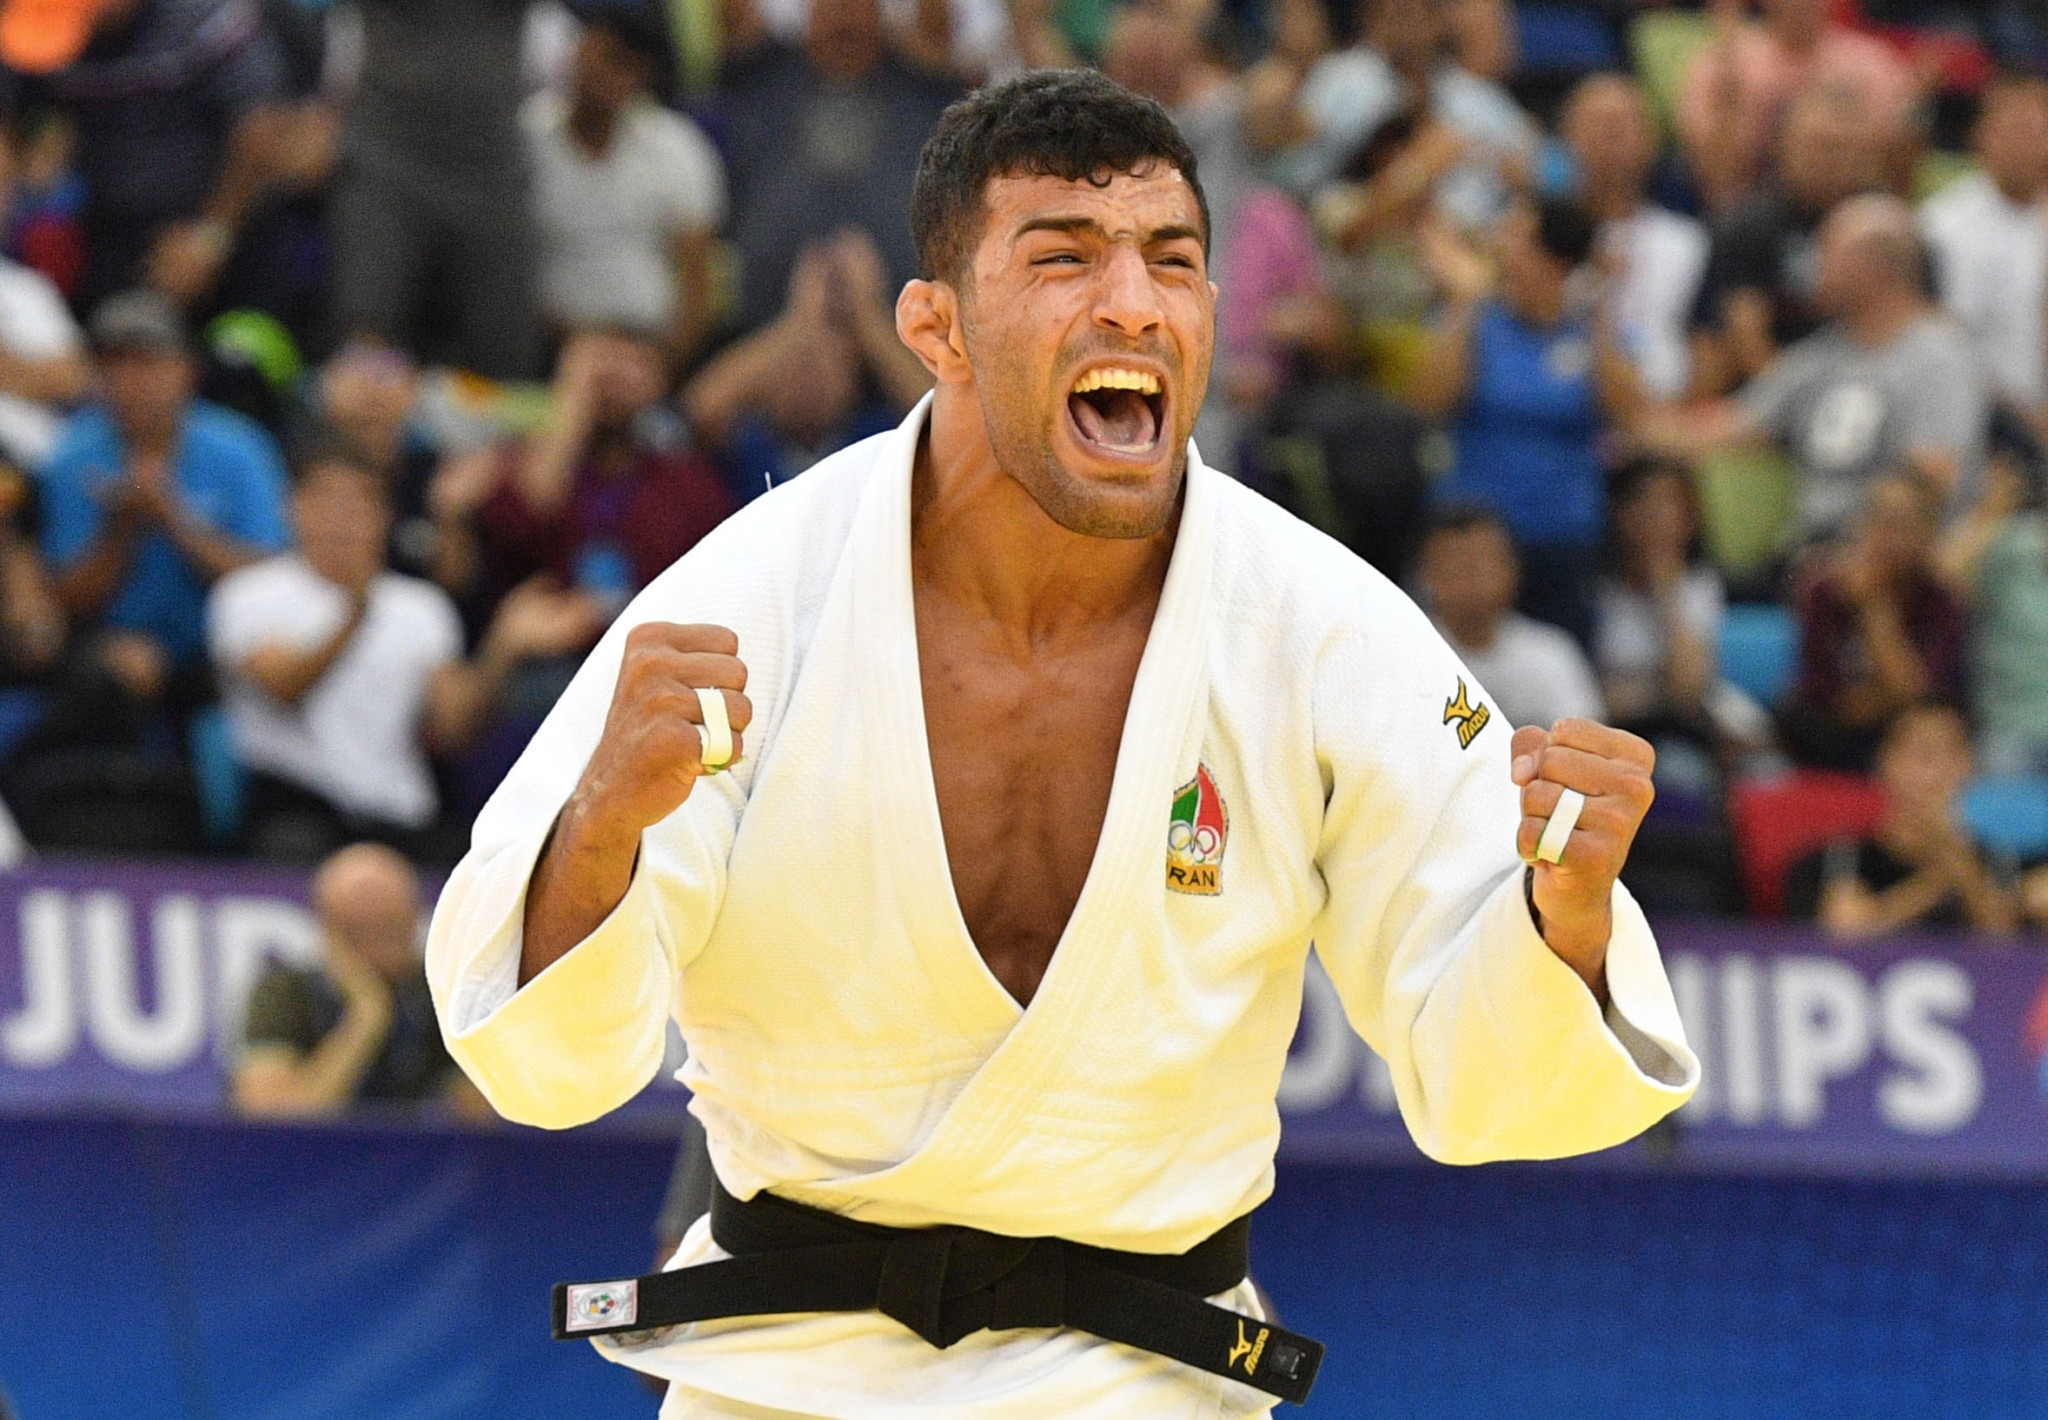 Iran is trying to intimidate its former world champion Saeid Mollaei ahead of a crucial case at the Court of Arbitration for Sport where they are appealing against an International Judo Federation suspension ©Getty Images